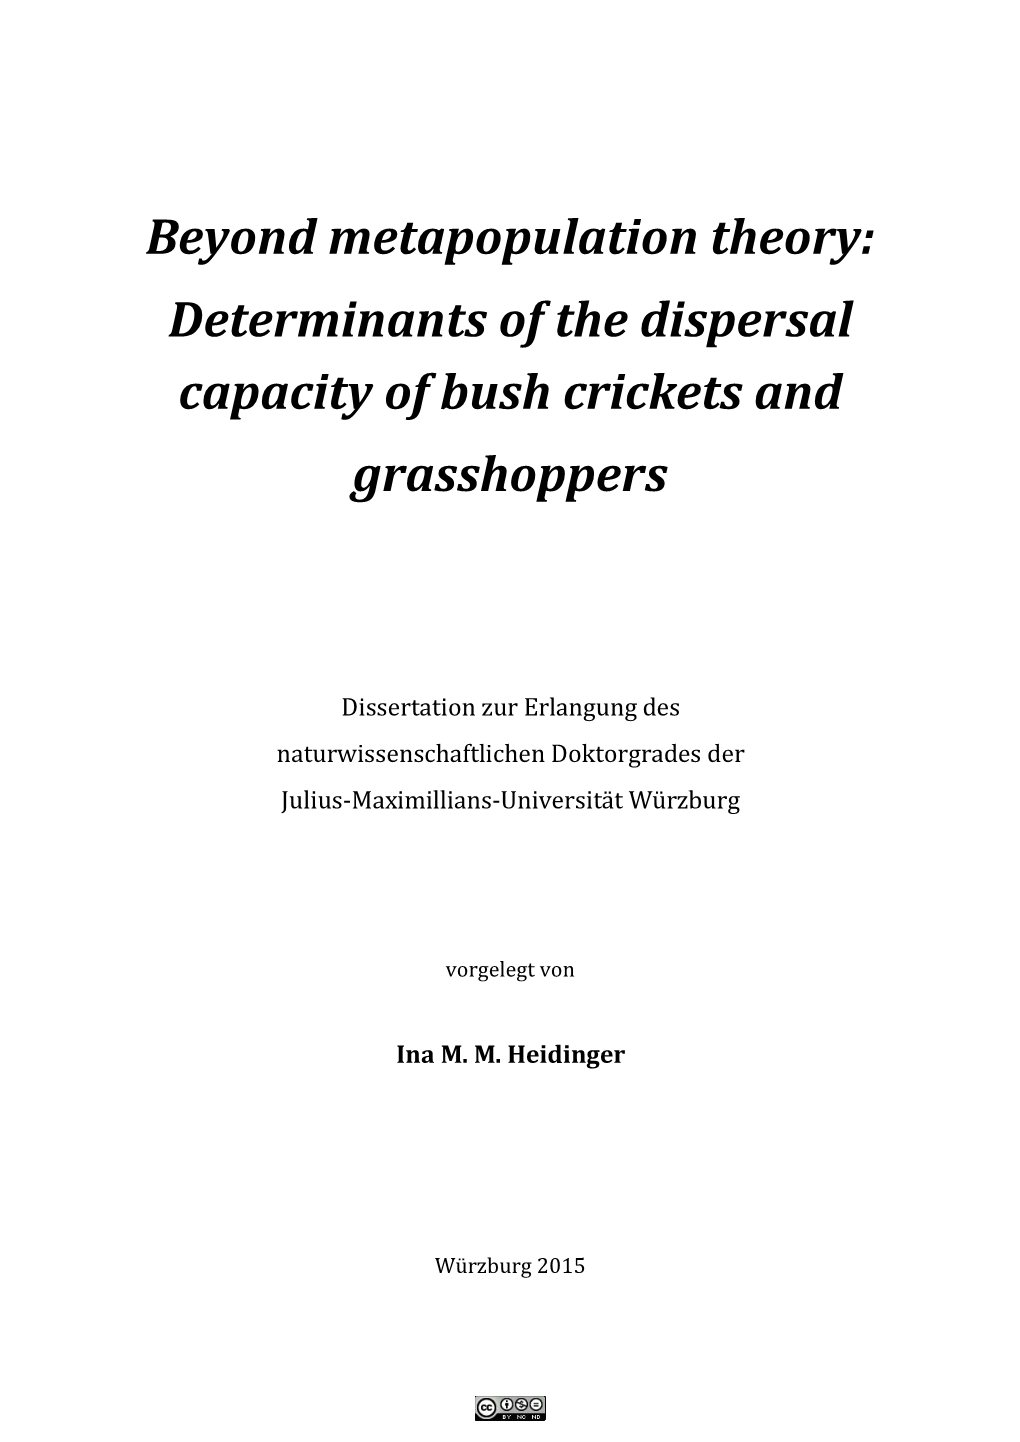 Determinants of the Dispersal Capacity of Bush Crickets and Grasshoppers